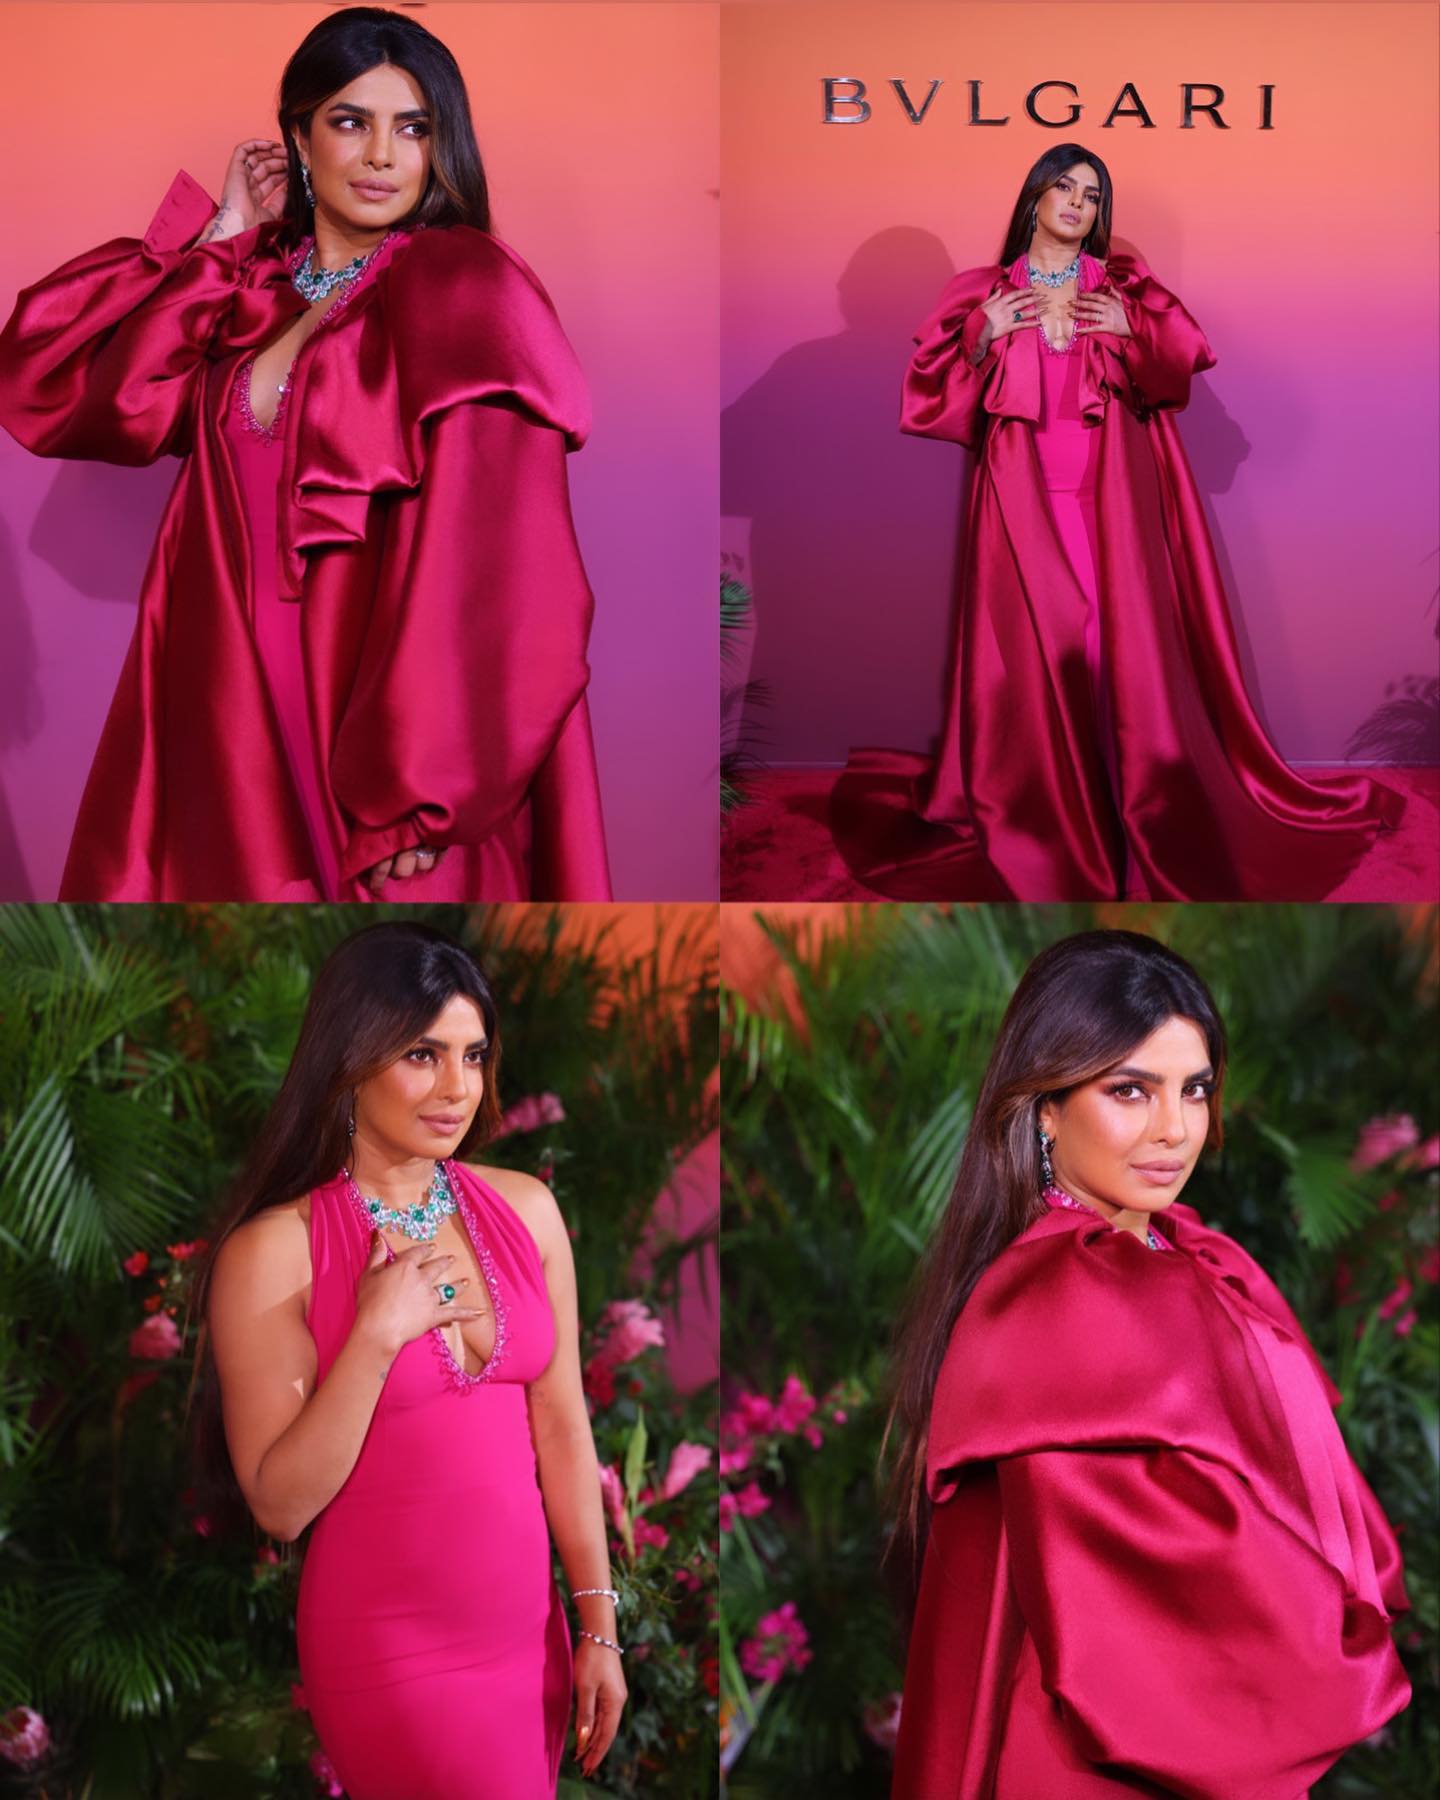 Priyanka Chopra gives fashion goals to fans with her unique outfit 8995